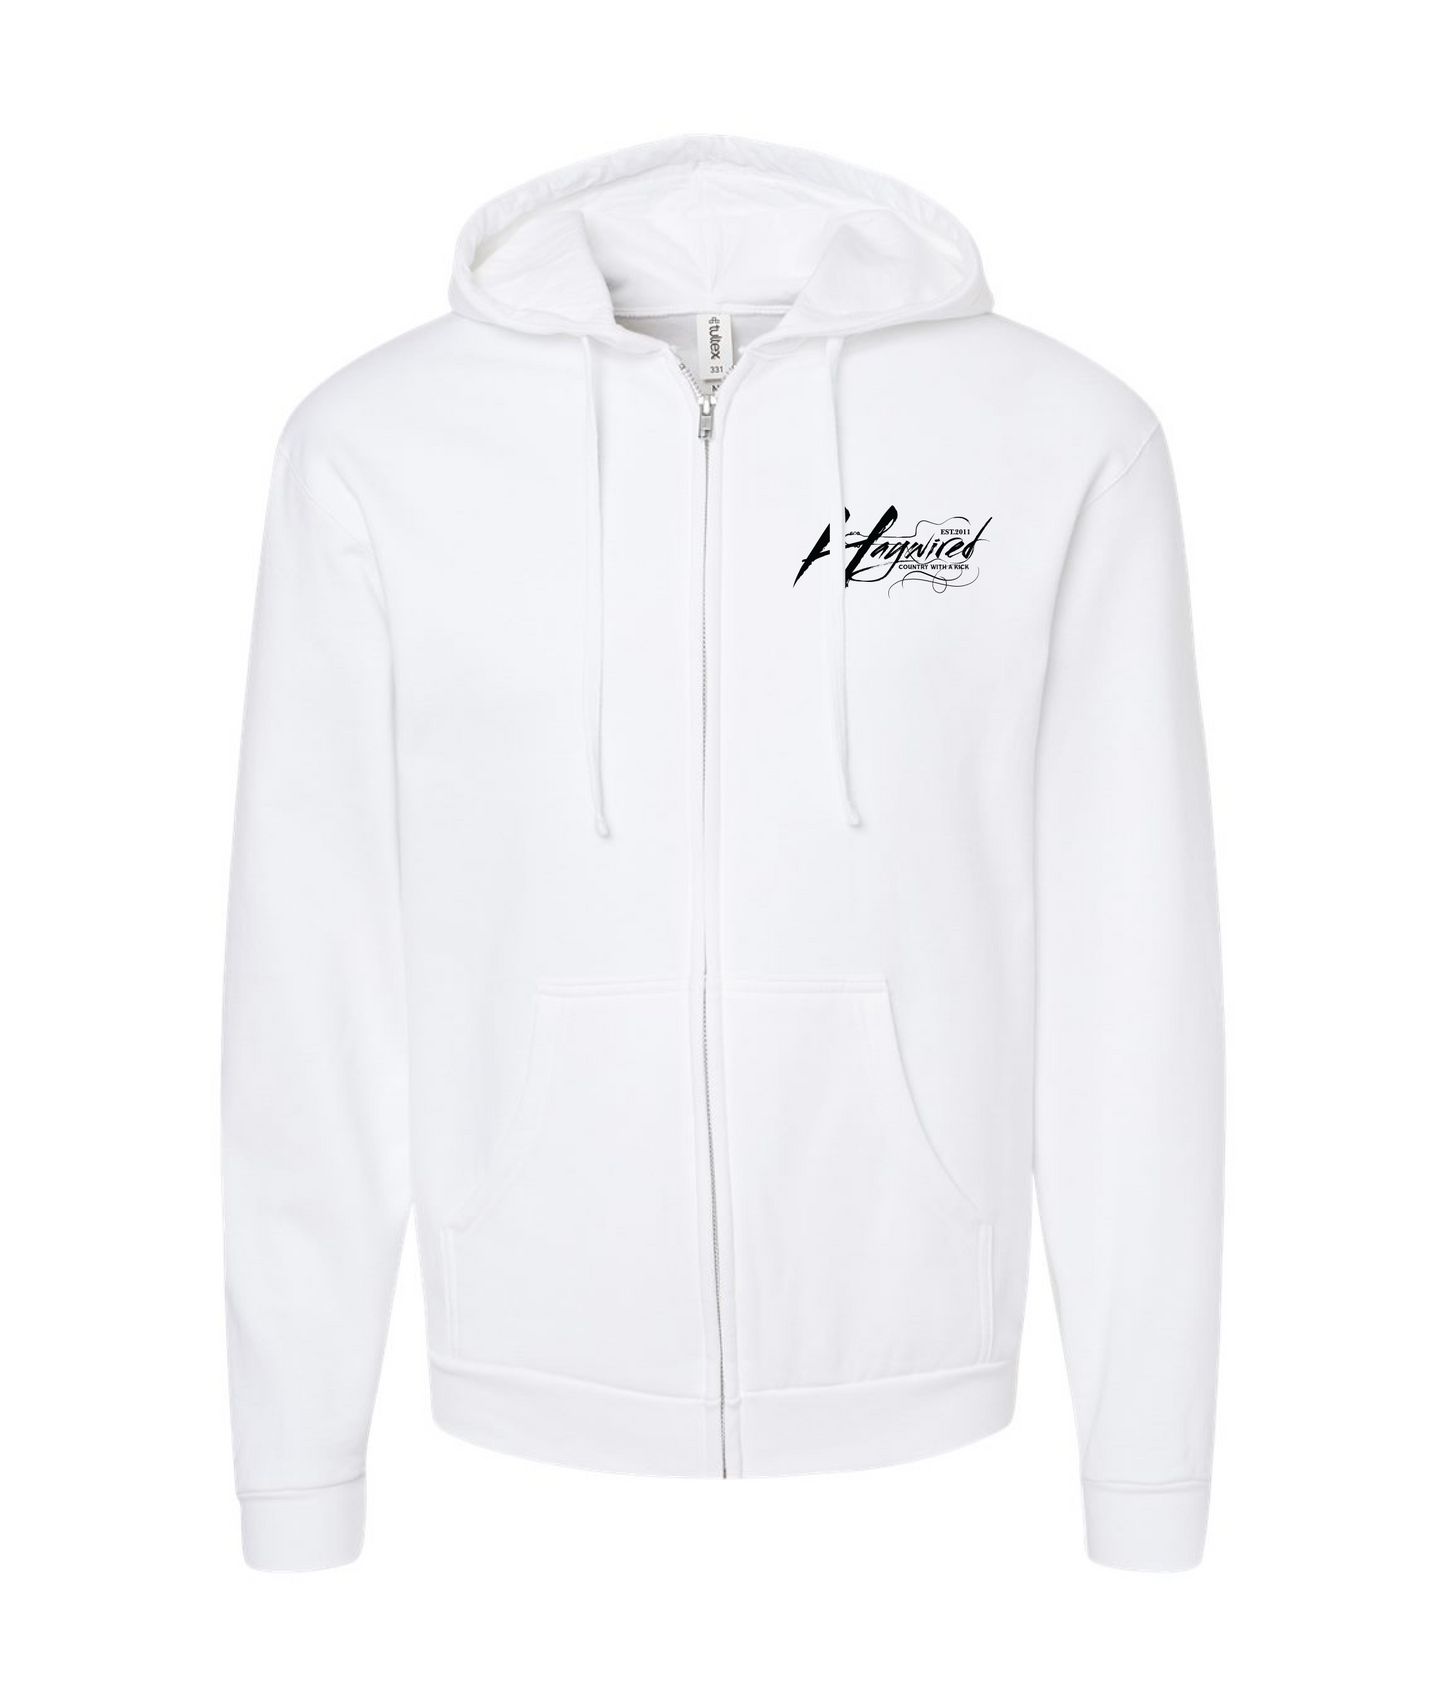 Haywired - Country With a Kick Logo - White Zip Hoodie